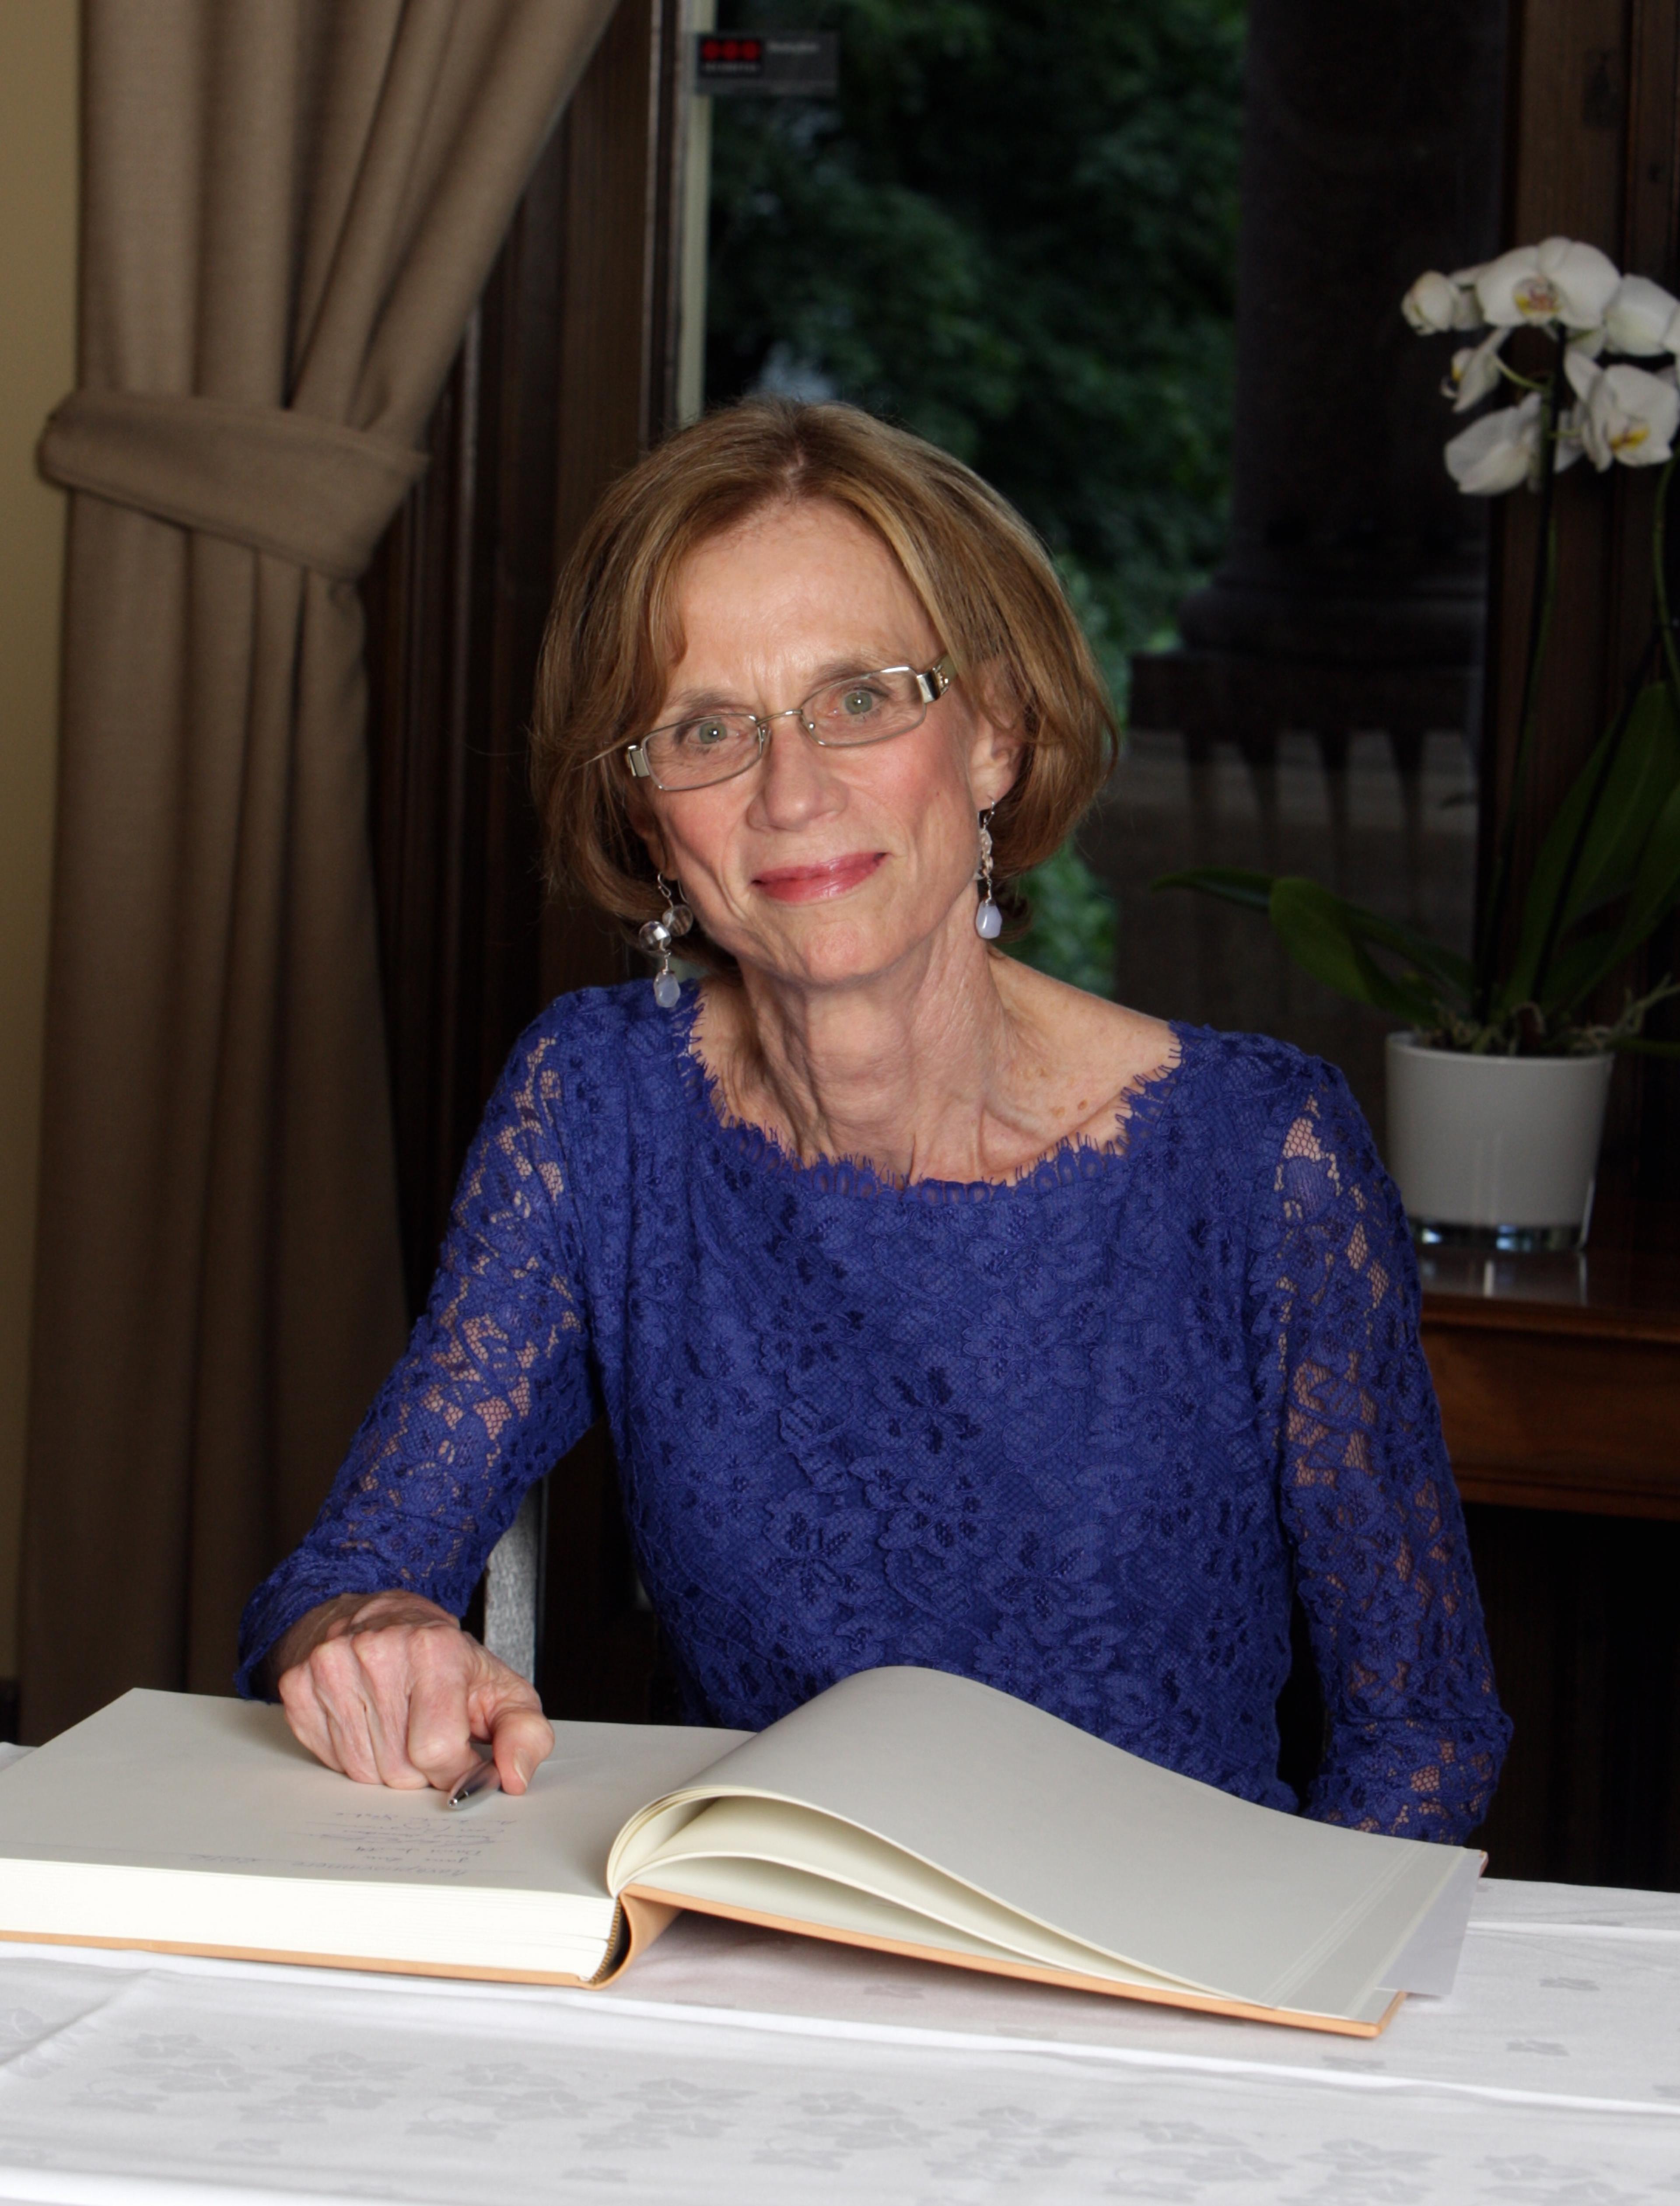 Ann Martin Graybiel signing the guest book at the Norwegian Academy of Science and Letters during the Kavli Prize week in Oslo